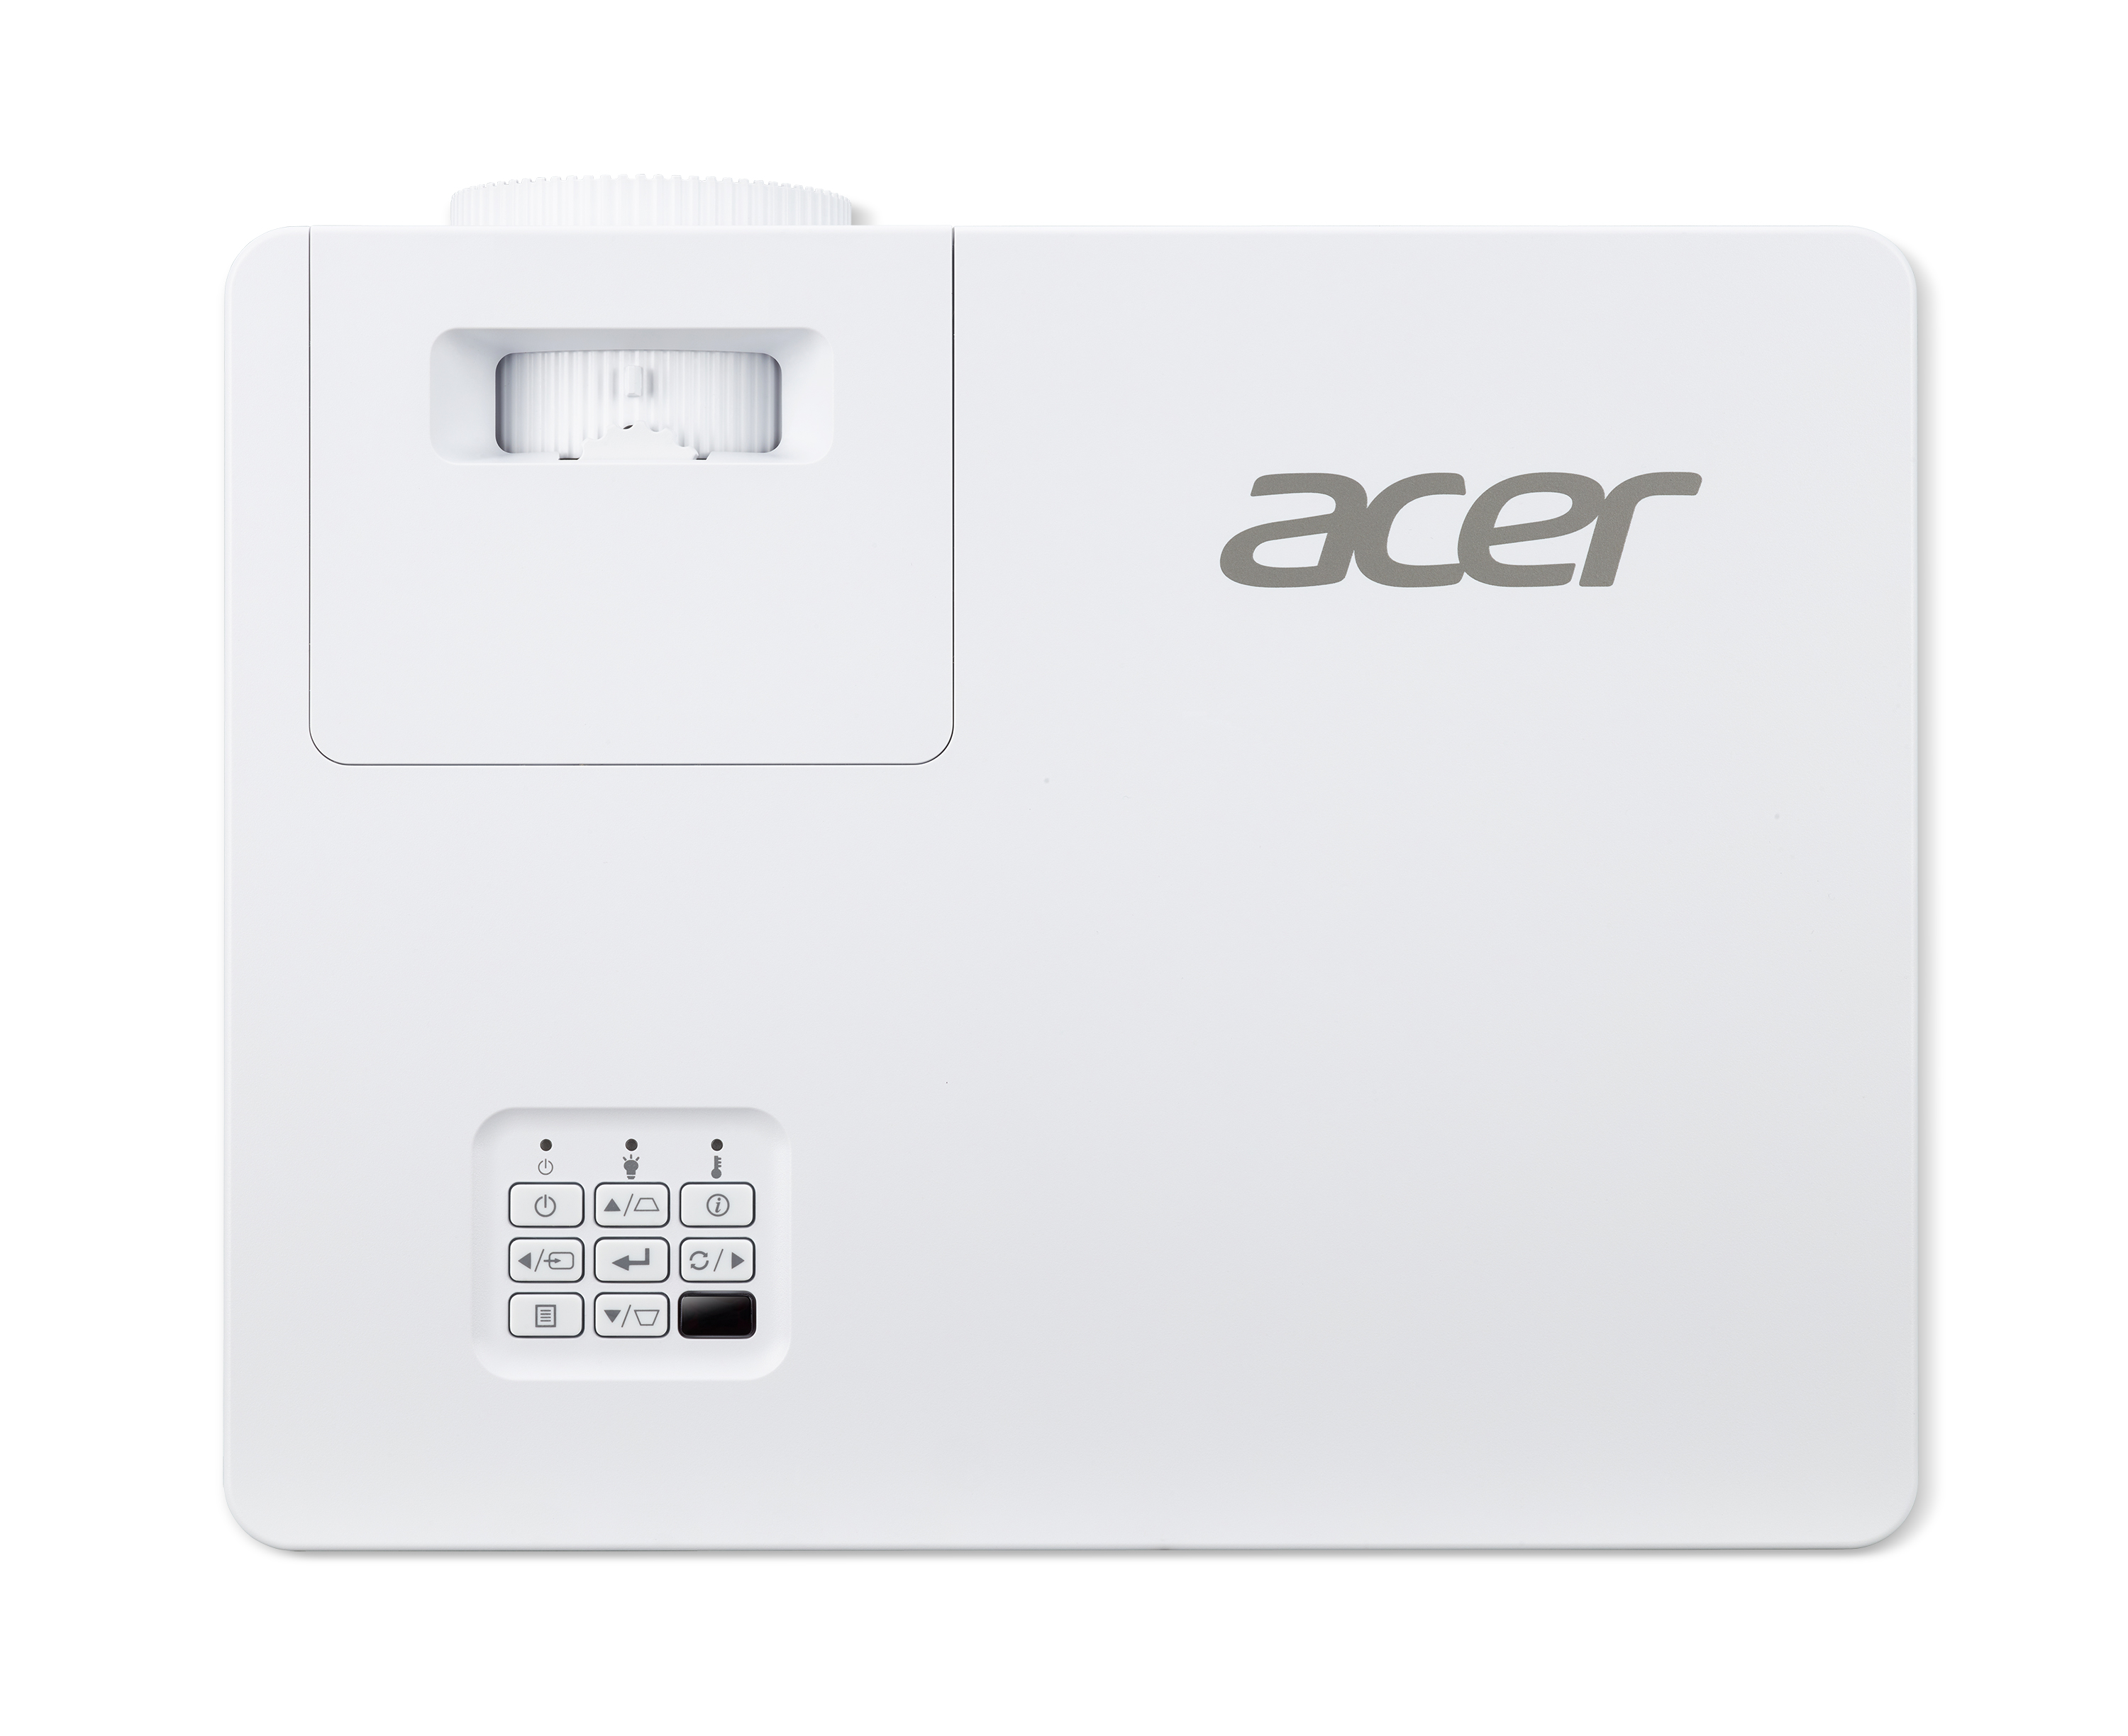 Acer Releases C250i Portable LED Projector with Multi-Angle